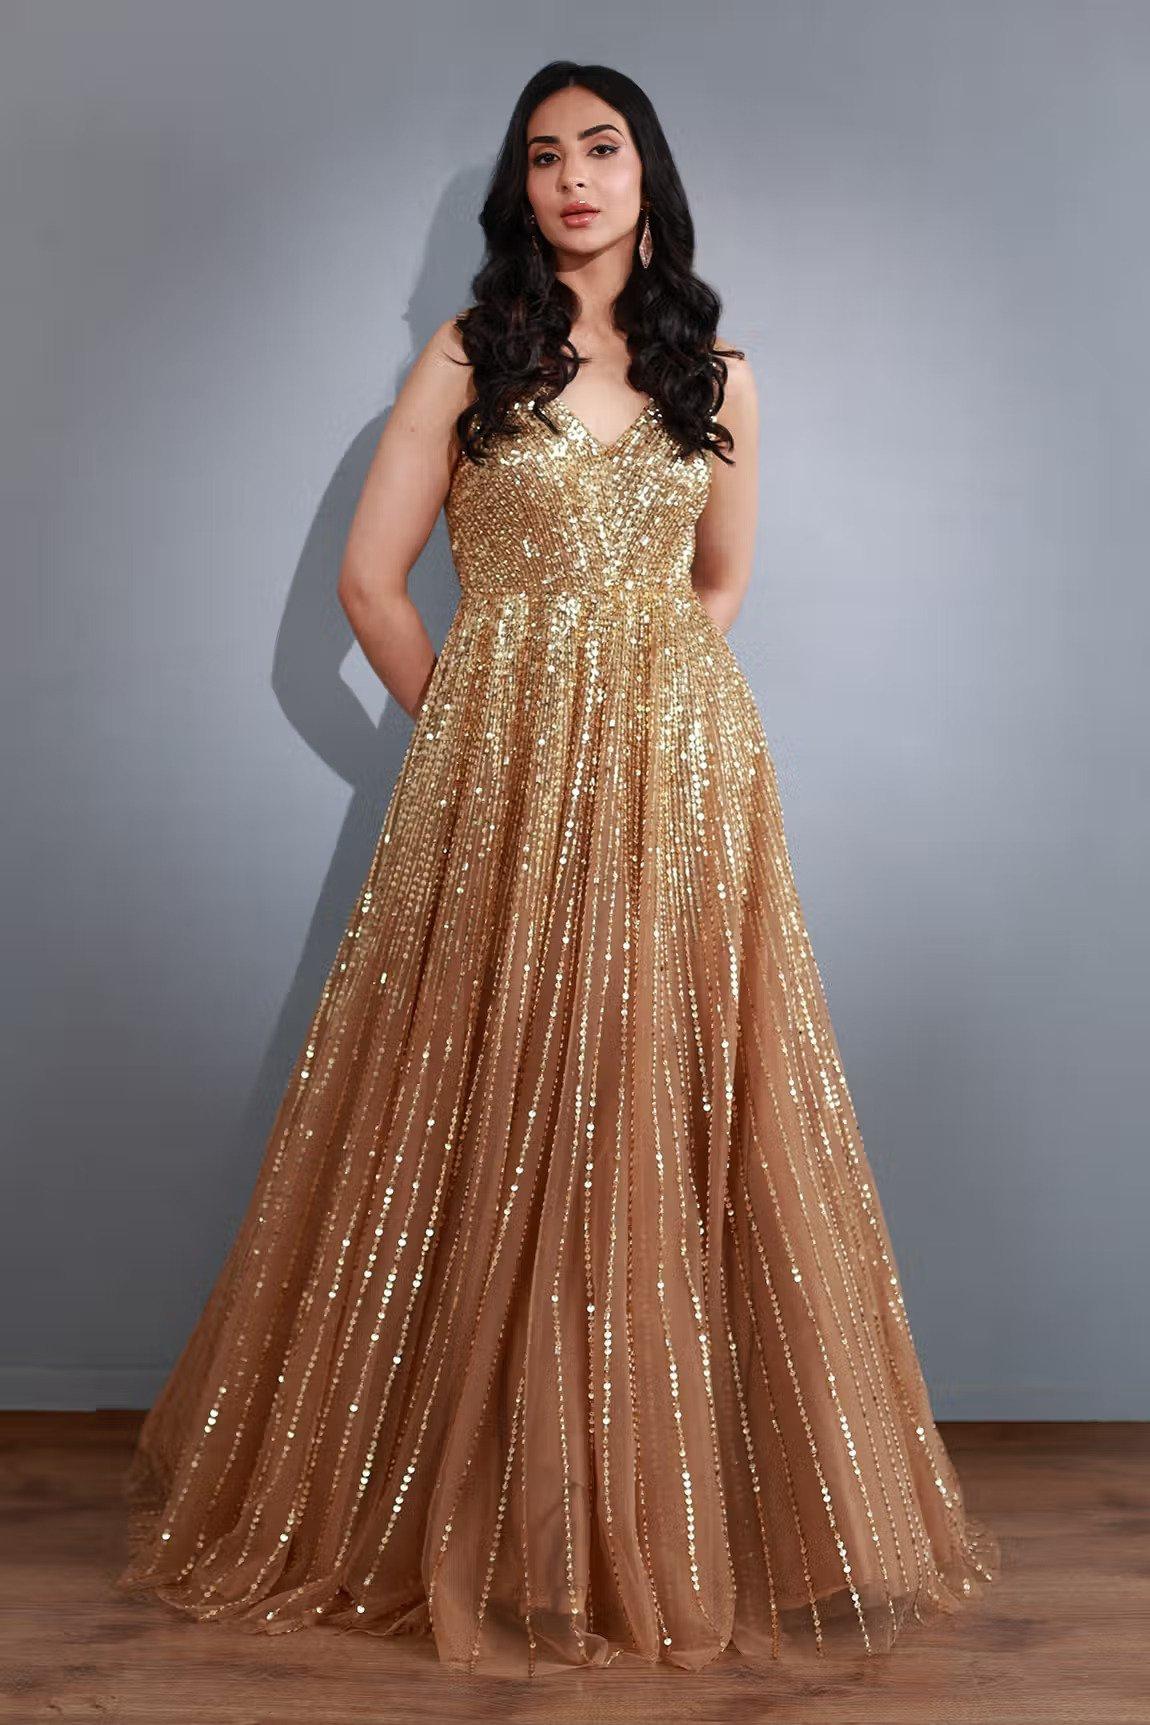 200+ Latest and Best Indian Wedding Dresses for Women and Girls of All Ages